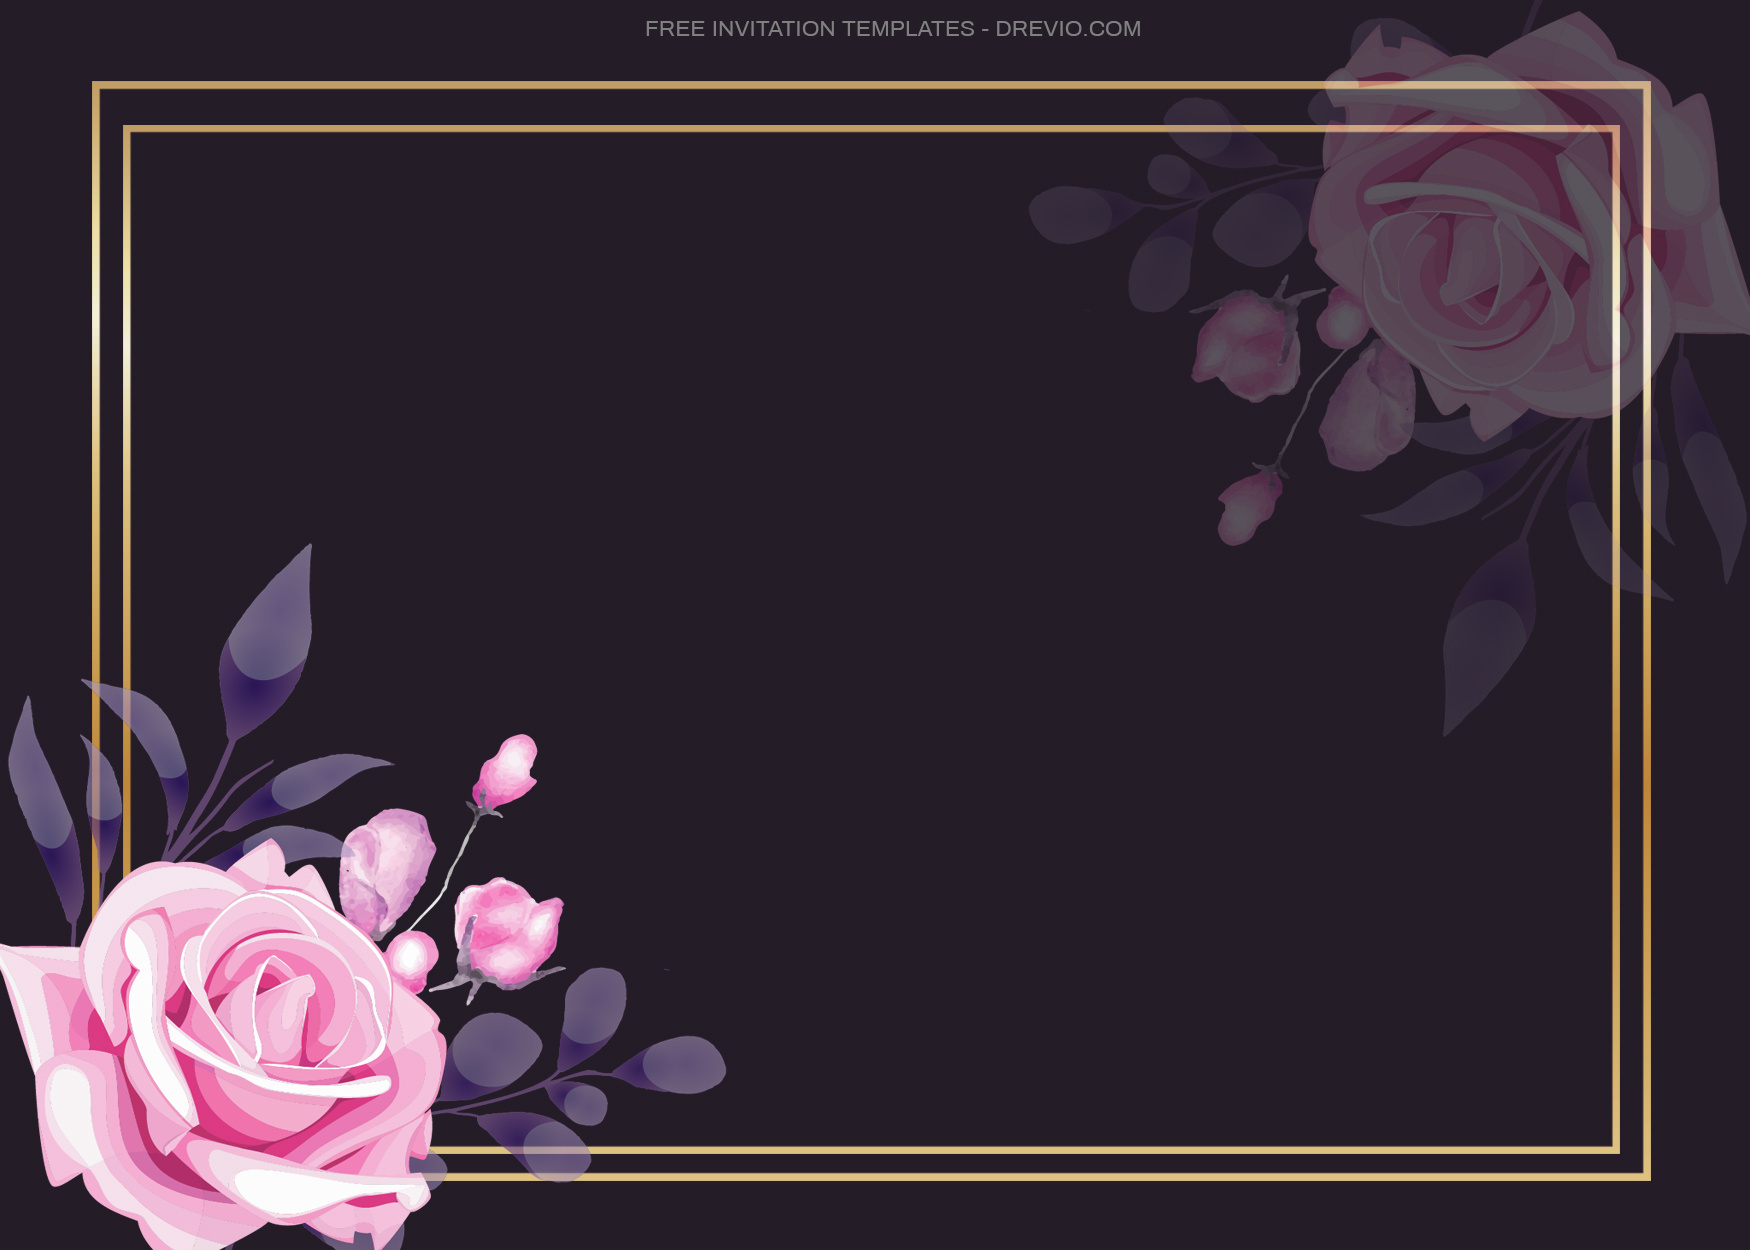 10+ Golden Square Roses Floral Invitation Template